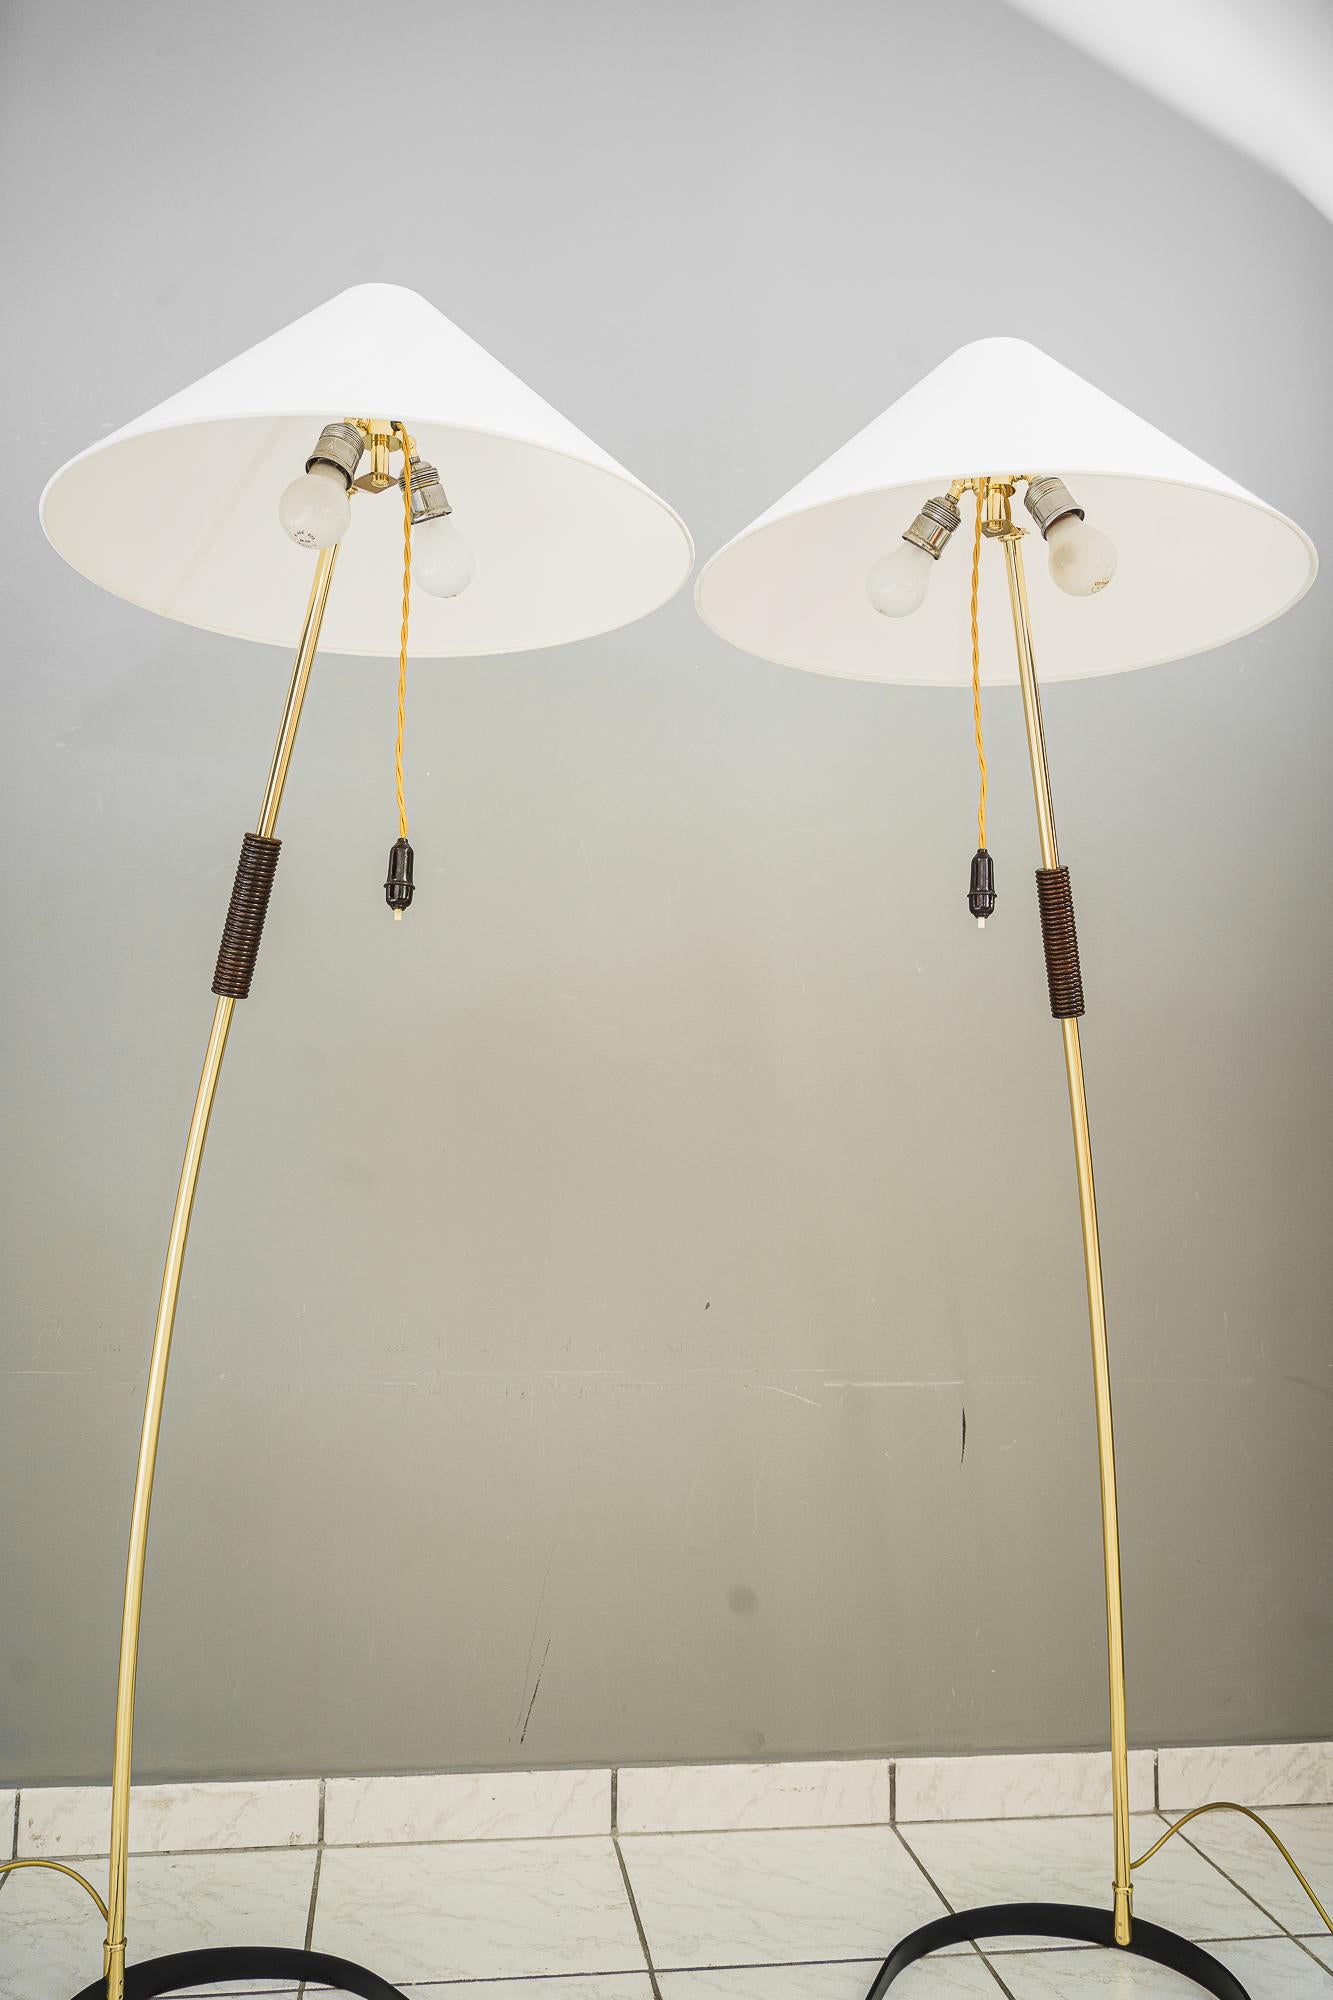 Mid-20th Century 2x Rupert Nikoll Floor Lamps with Wood Handle, circa 1950s For Sale